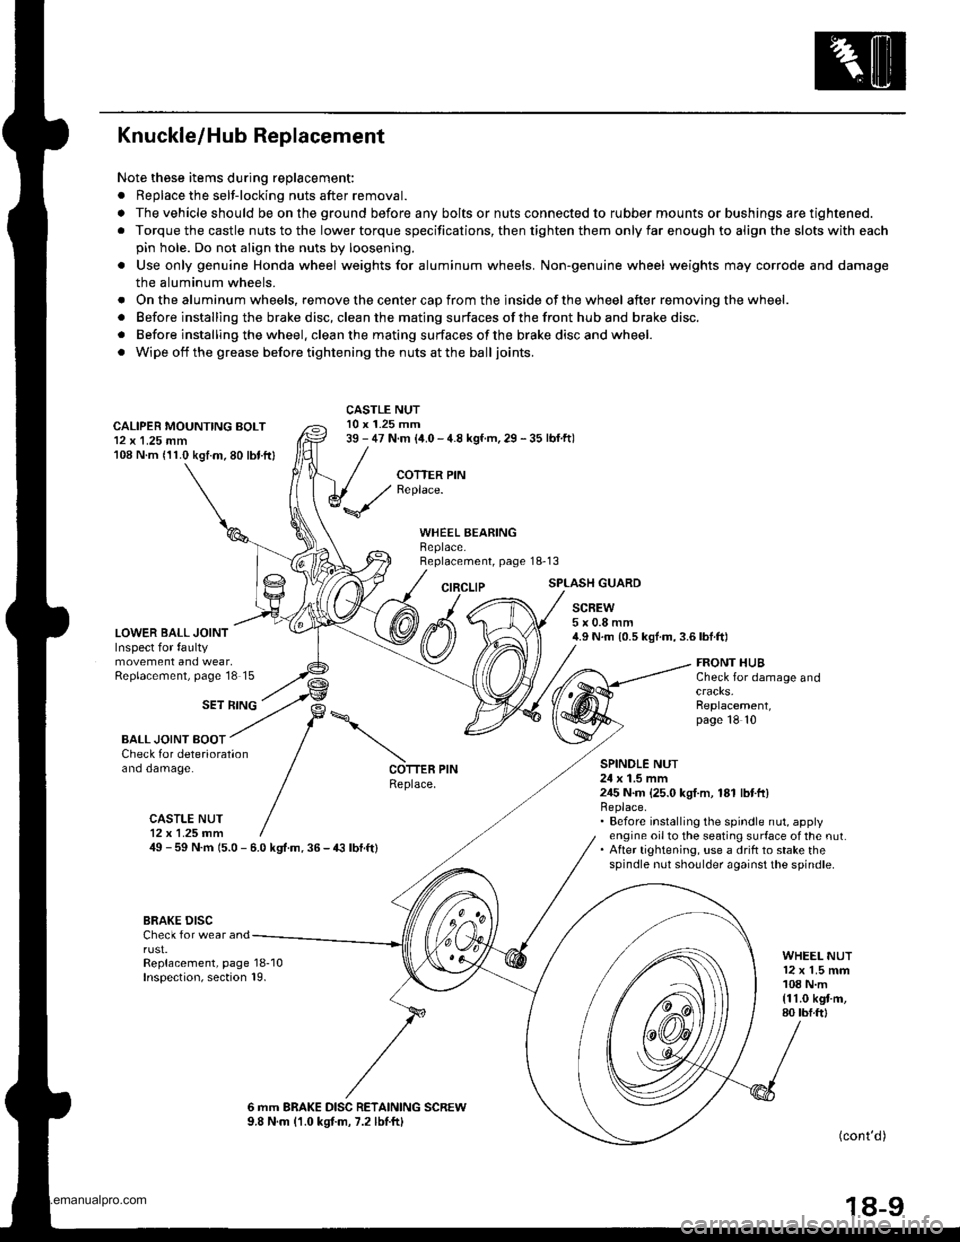 HONDA CR-V 1999 RD1-RD3 / 1.G Workshop Manual 
Knuckle/Hub Replacement
Note these items during replacement:
. Replace the selt-locking nuts after removal.
. The vehicle should be on the ground before any bolts or nuts connected to rubber mounts o